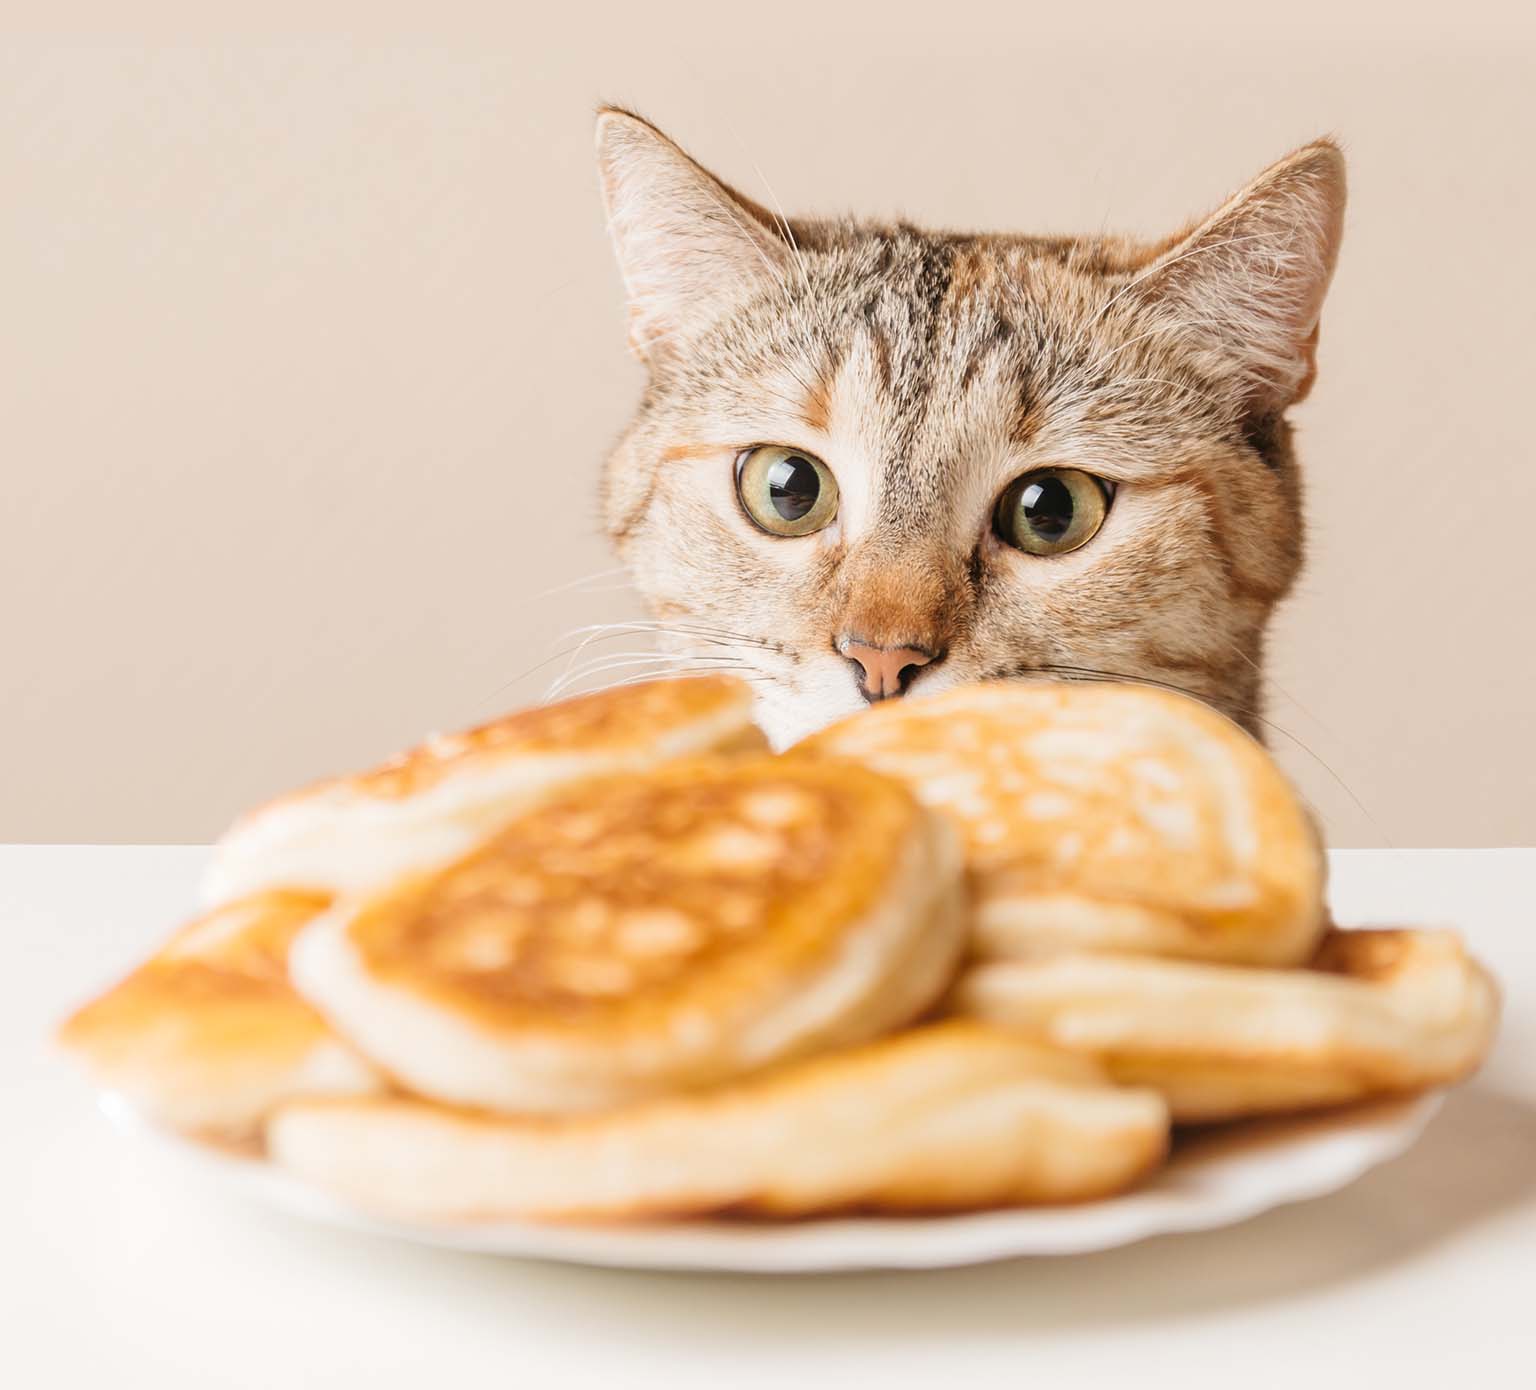 10 human foods that are dangerous for cats